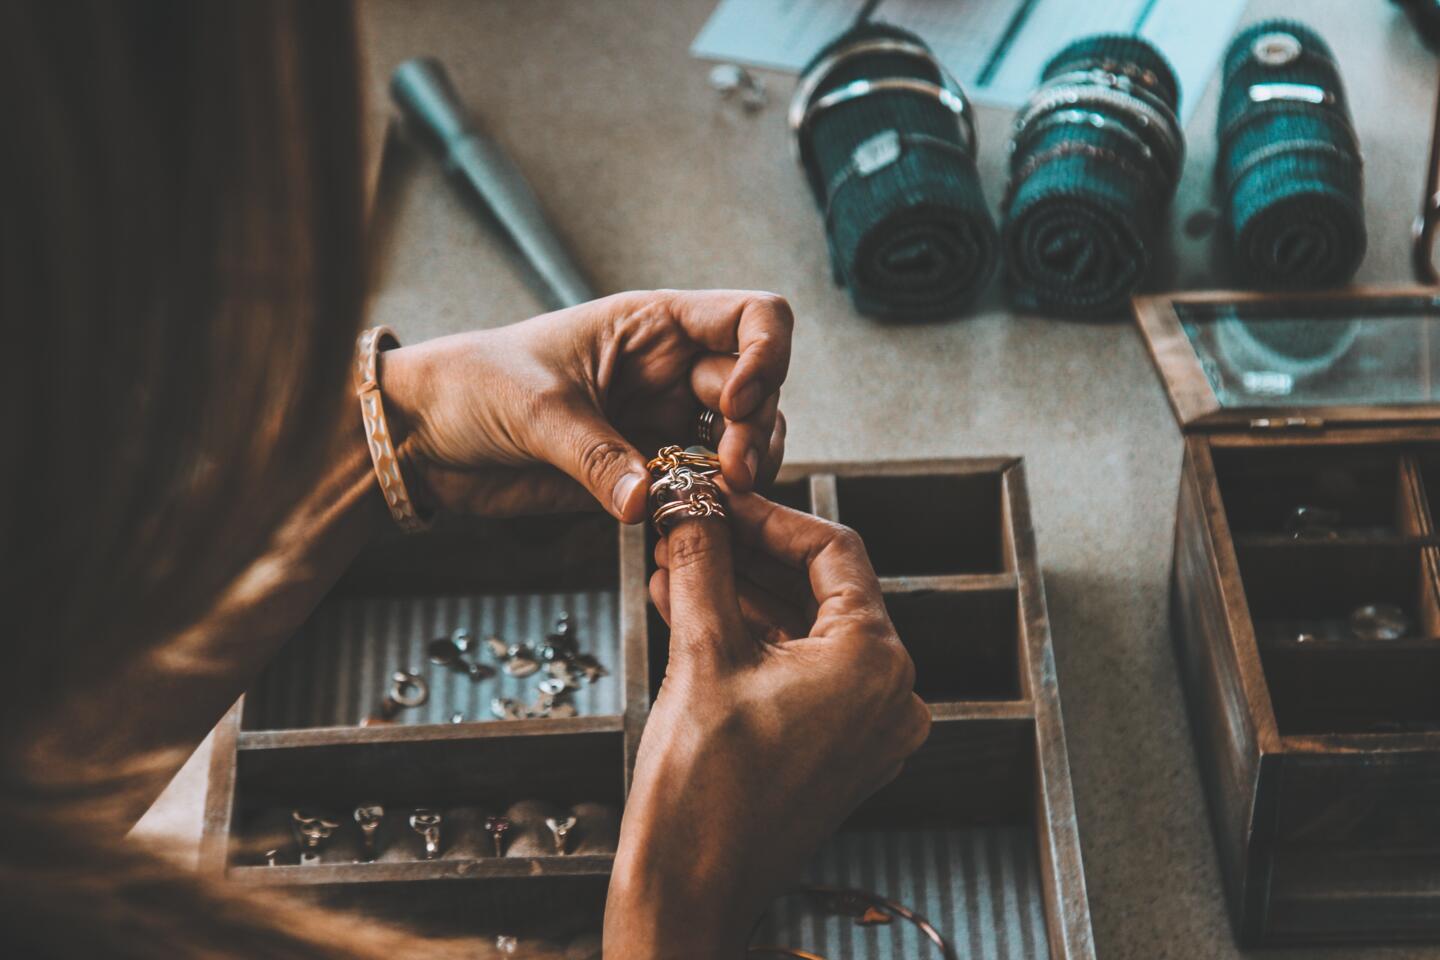 Jewelry artisan meticulously working on a ring in their workshop, with tools and compartmentalized boxes containing various pieces of jewelry in the background, conveying an ambiance of creativity and precision for the Bijorhca Paris exhibition.